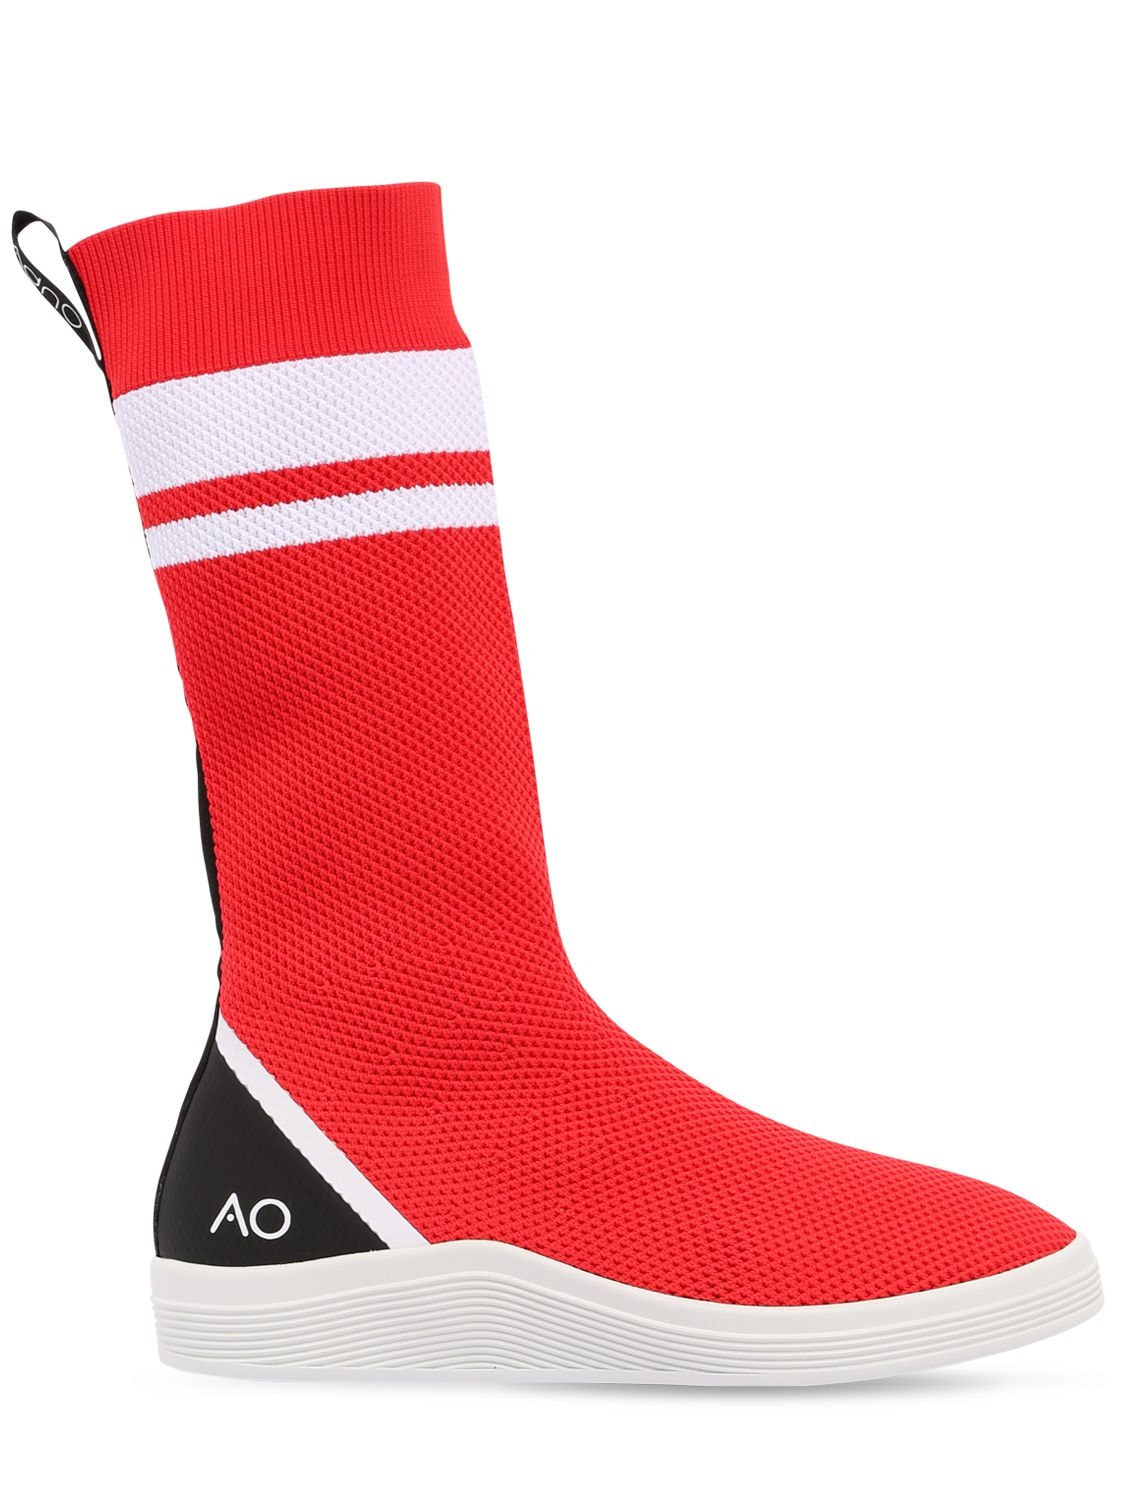 Adno Striped Knit Slip-on High Top Sneakers In Red,white